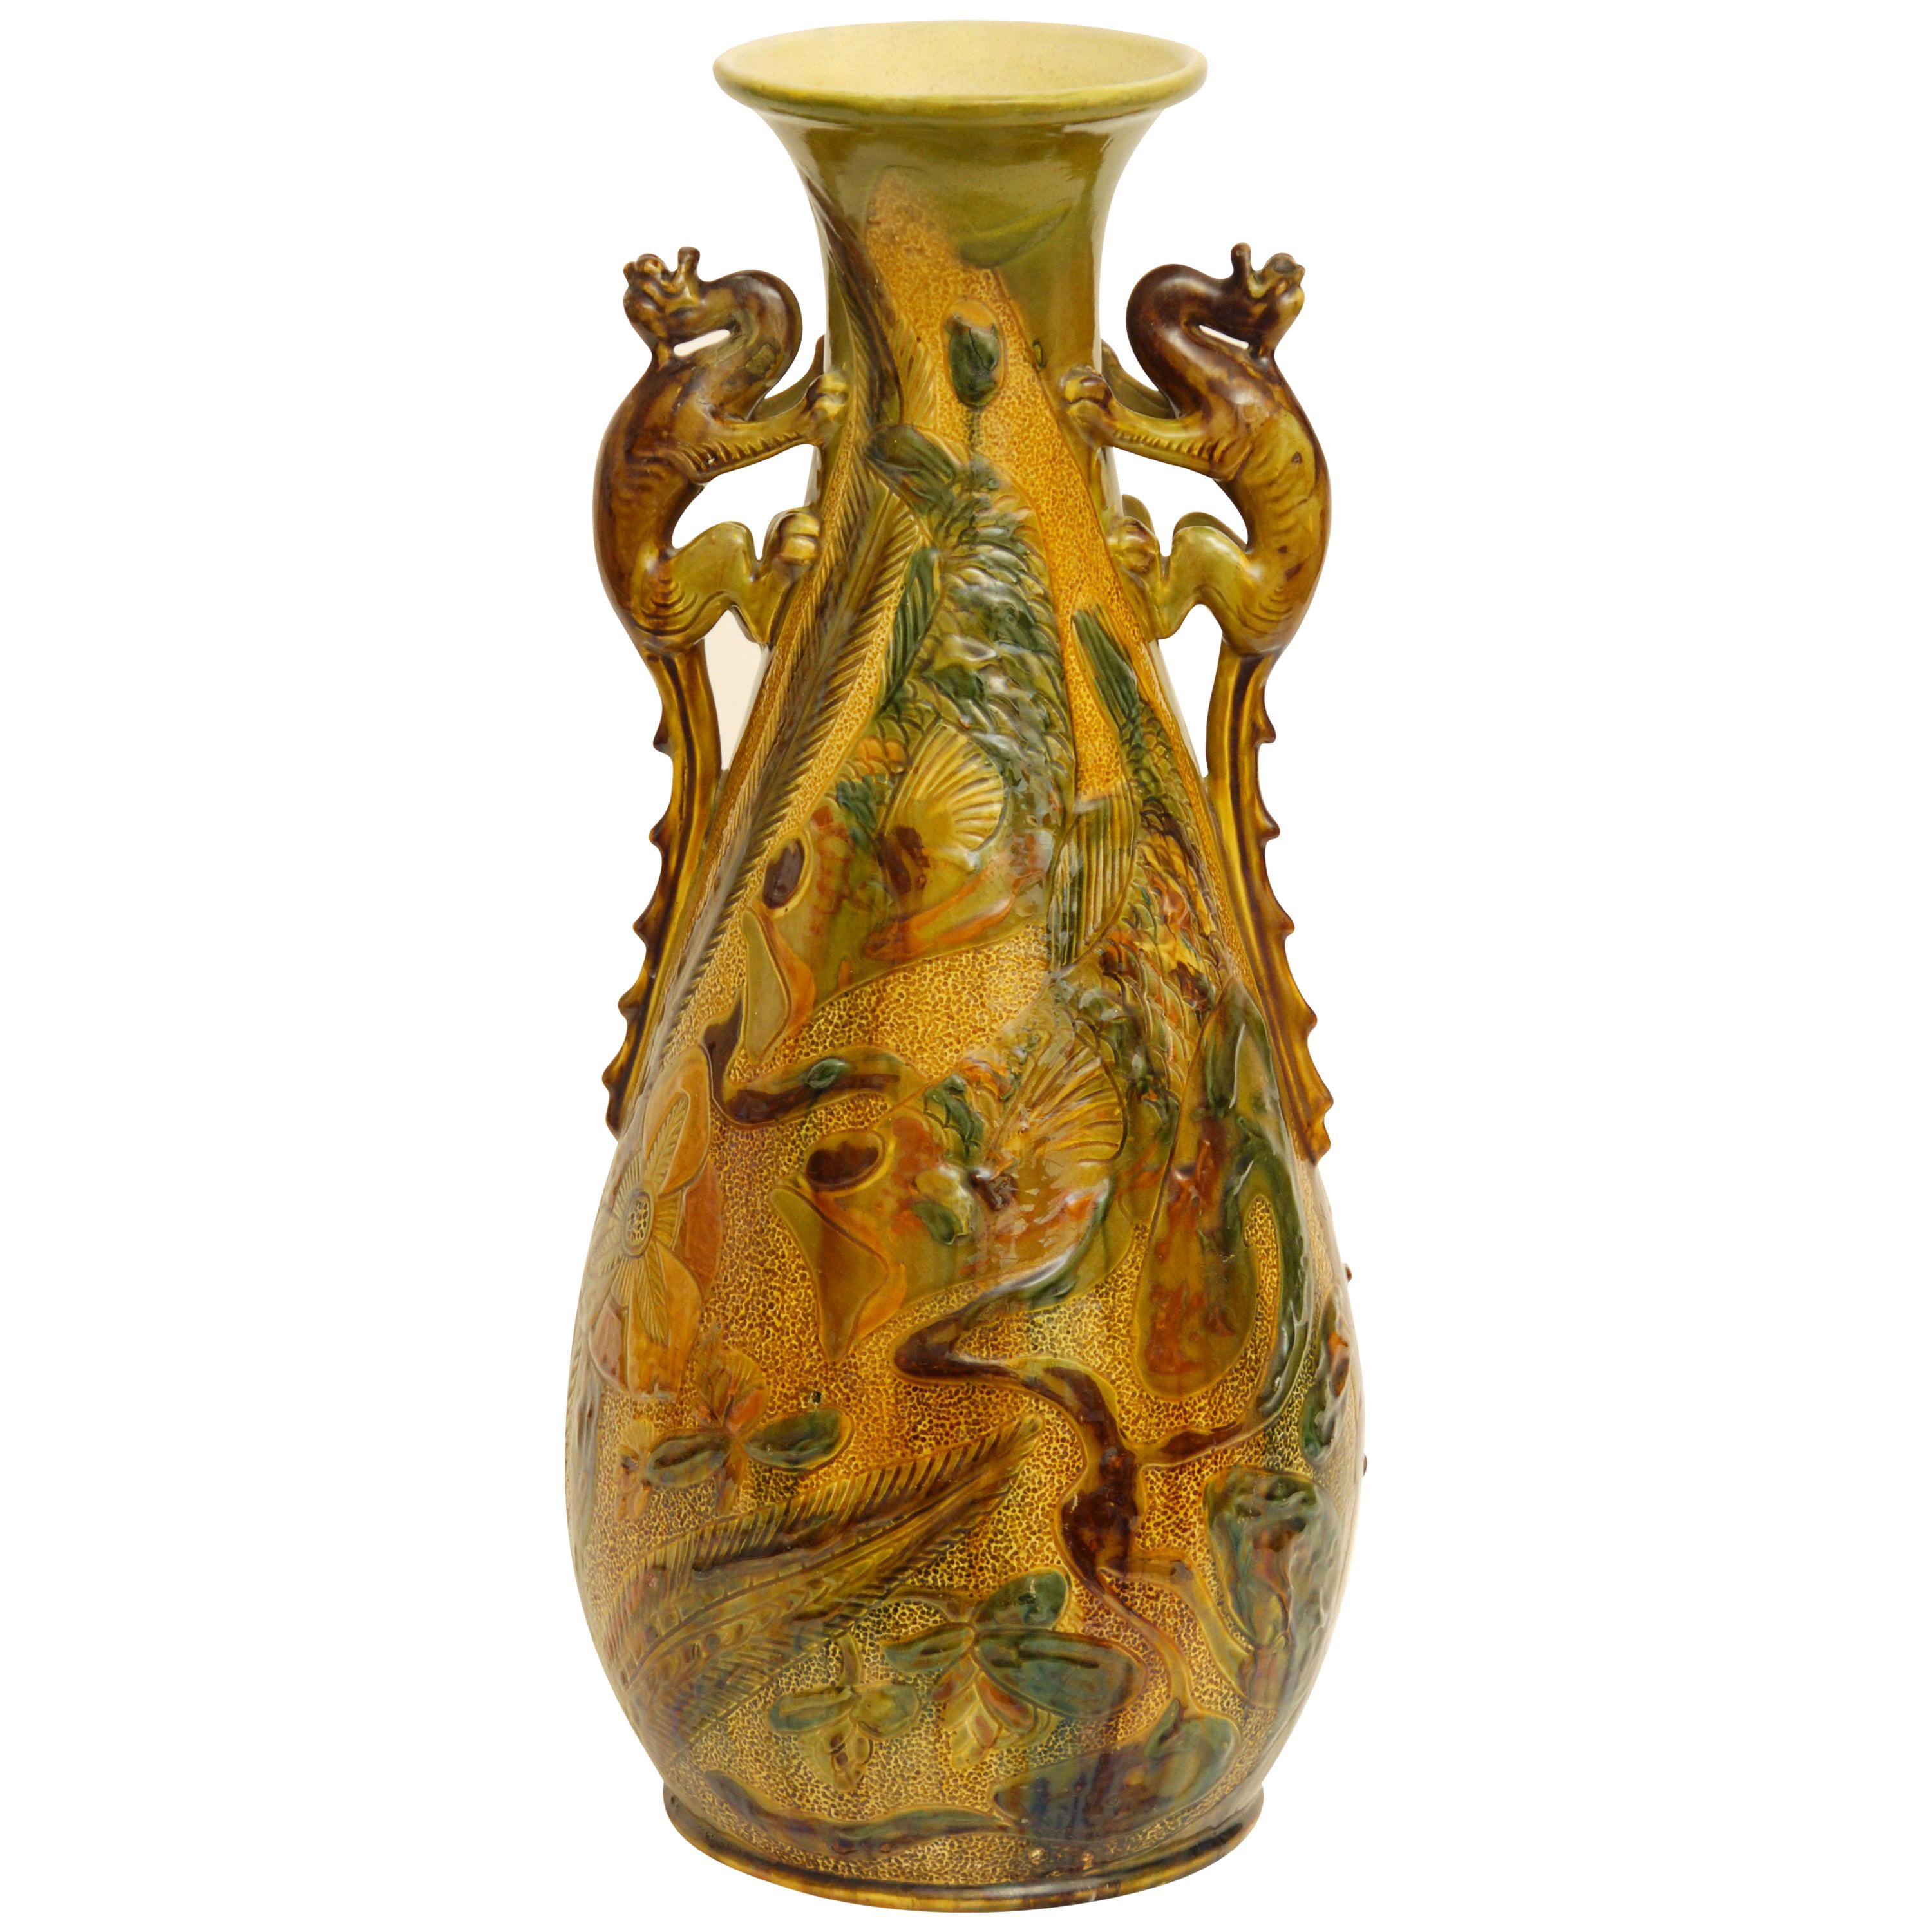 Early 20th Century Art Nouveau or Arts & Crafts Lizard Handle Vase by Brannam For Sale